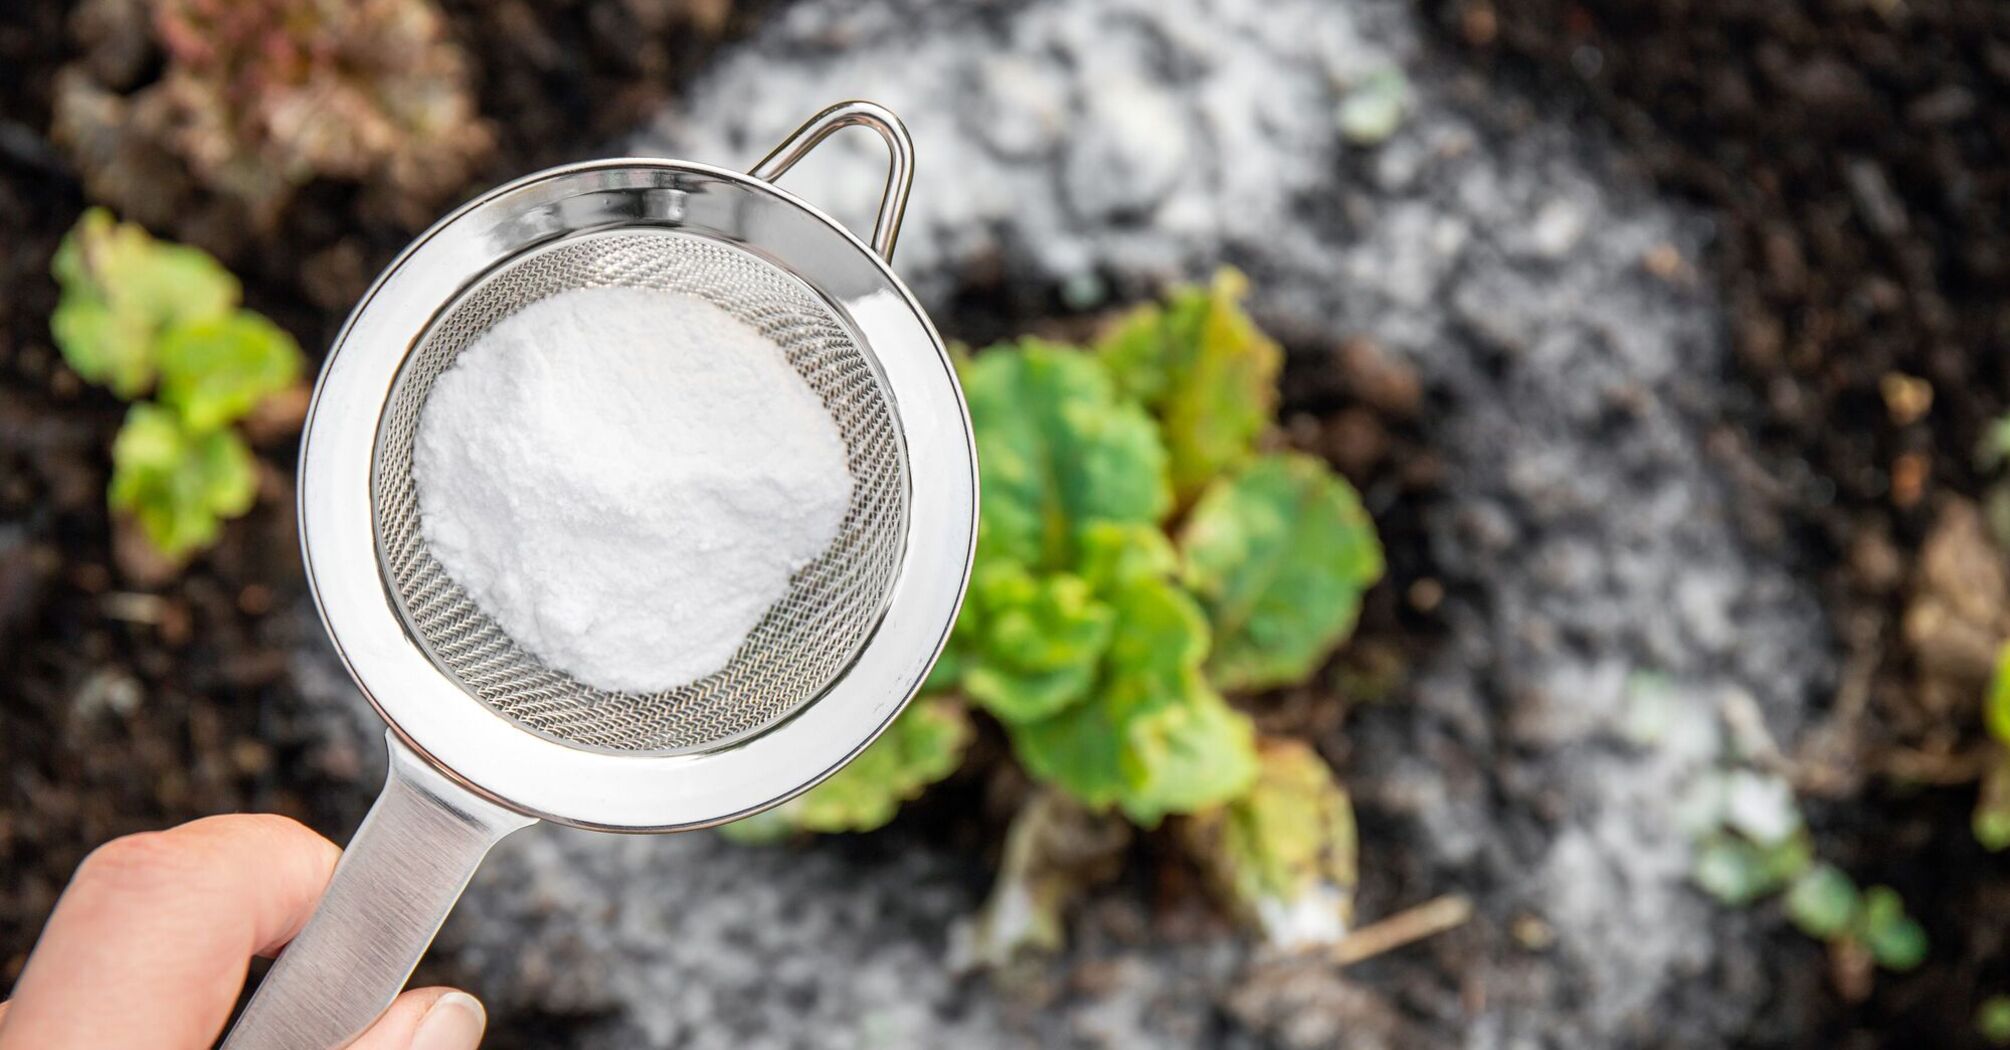 How baking soda can help with gardening